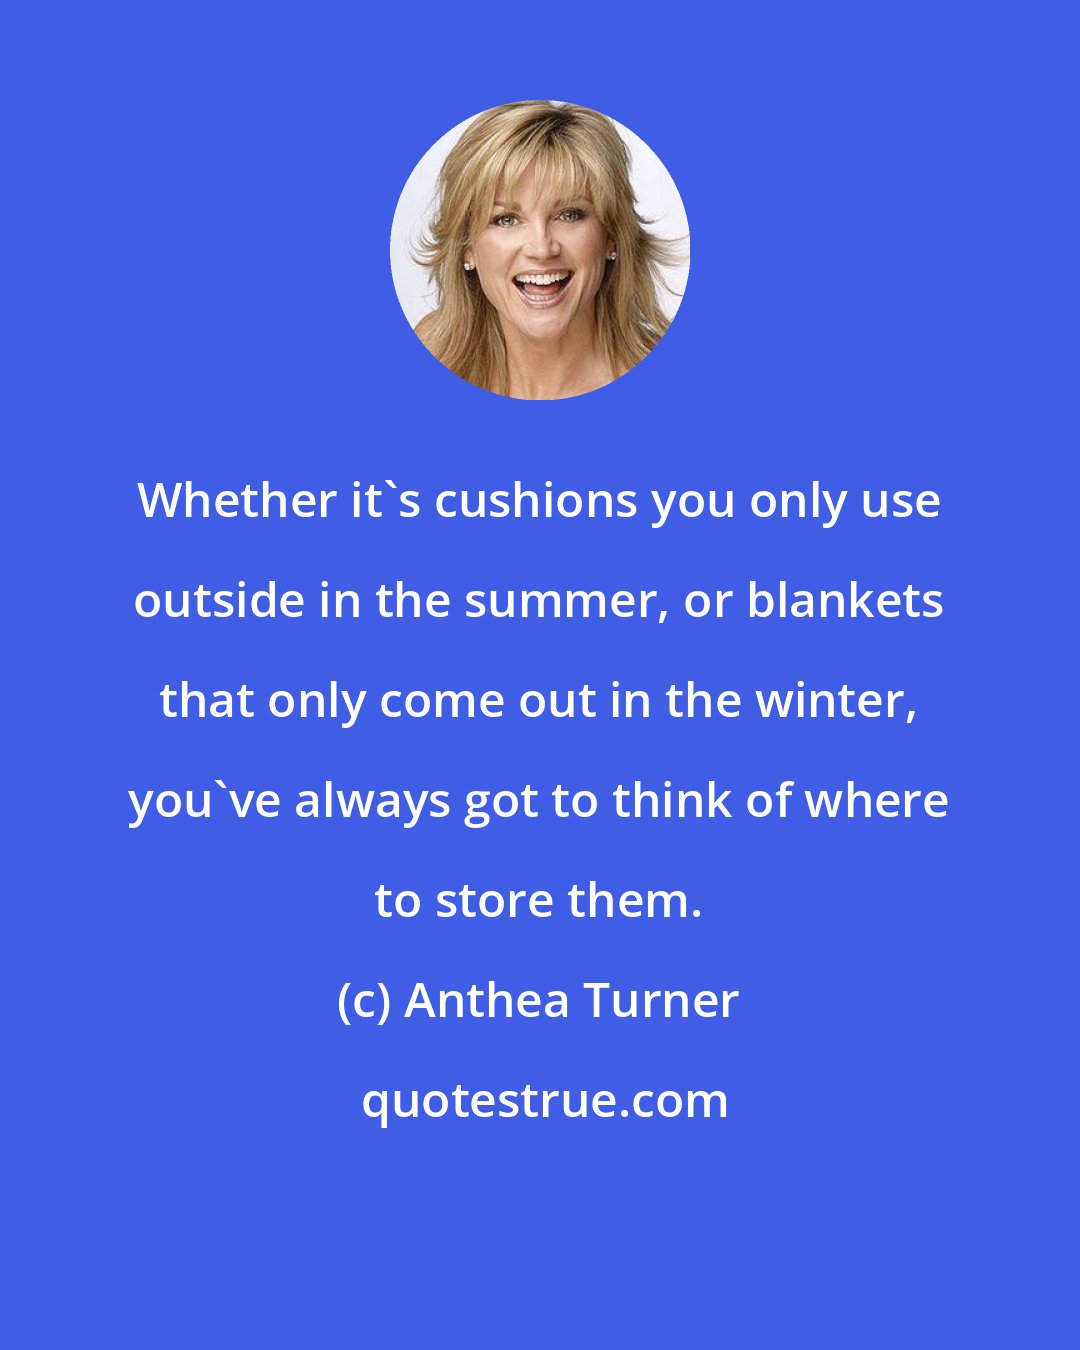 Anthea Turner: Whether it's cushions you only use outside in the summer, or blankets that only come out in the winter, you've always got to think of where to store them.